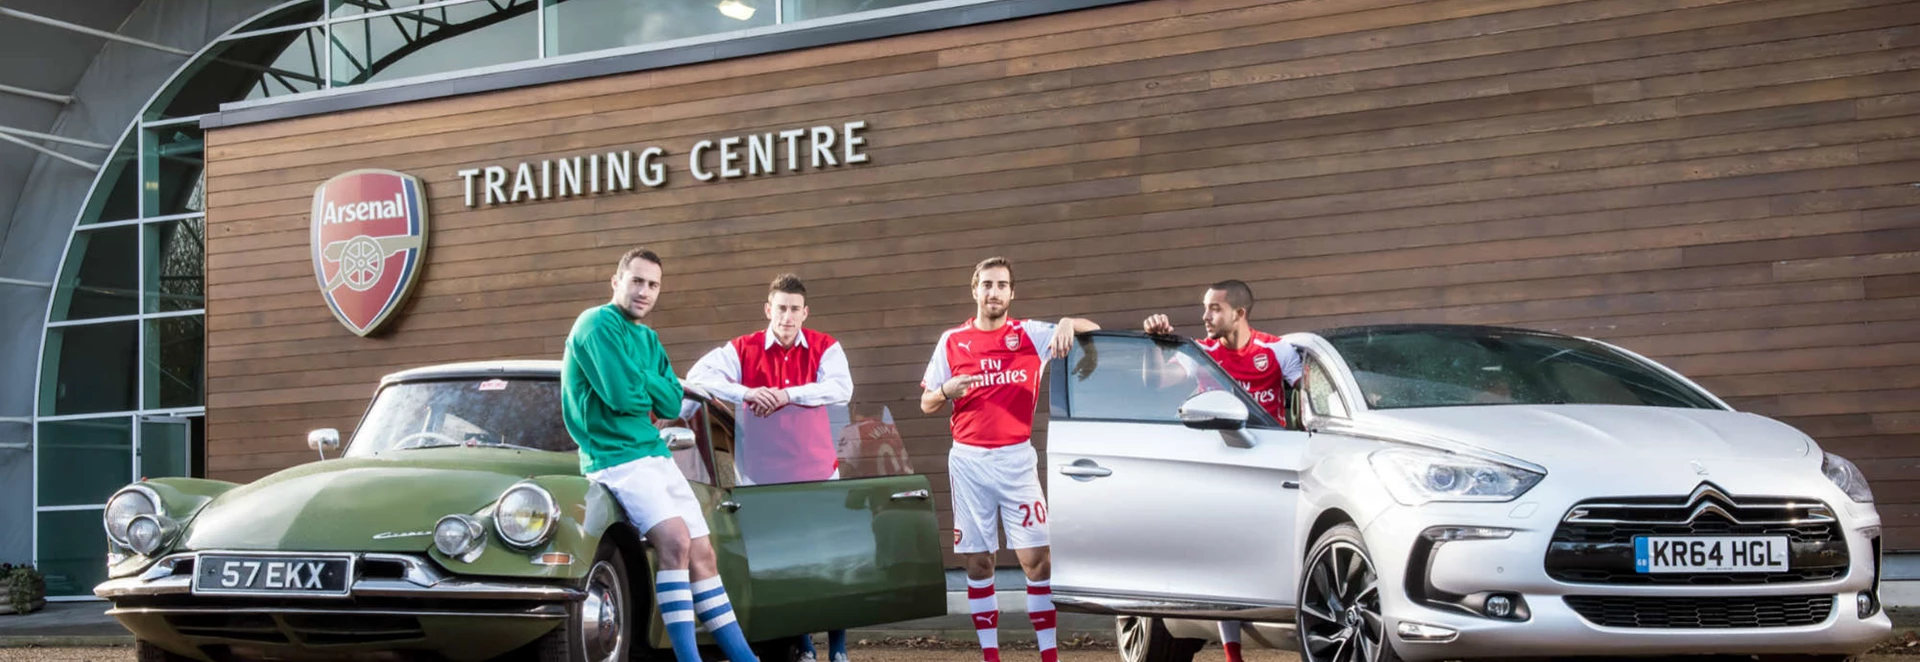 The cars of Arsenal Football Club players 